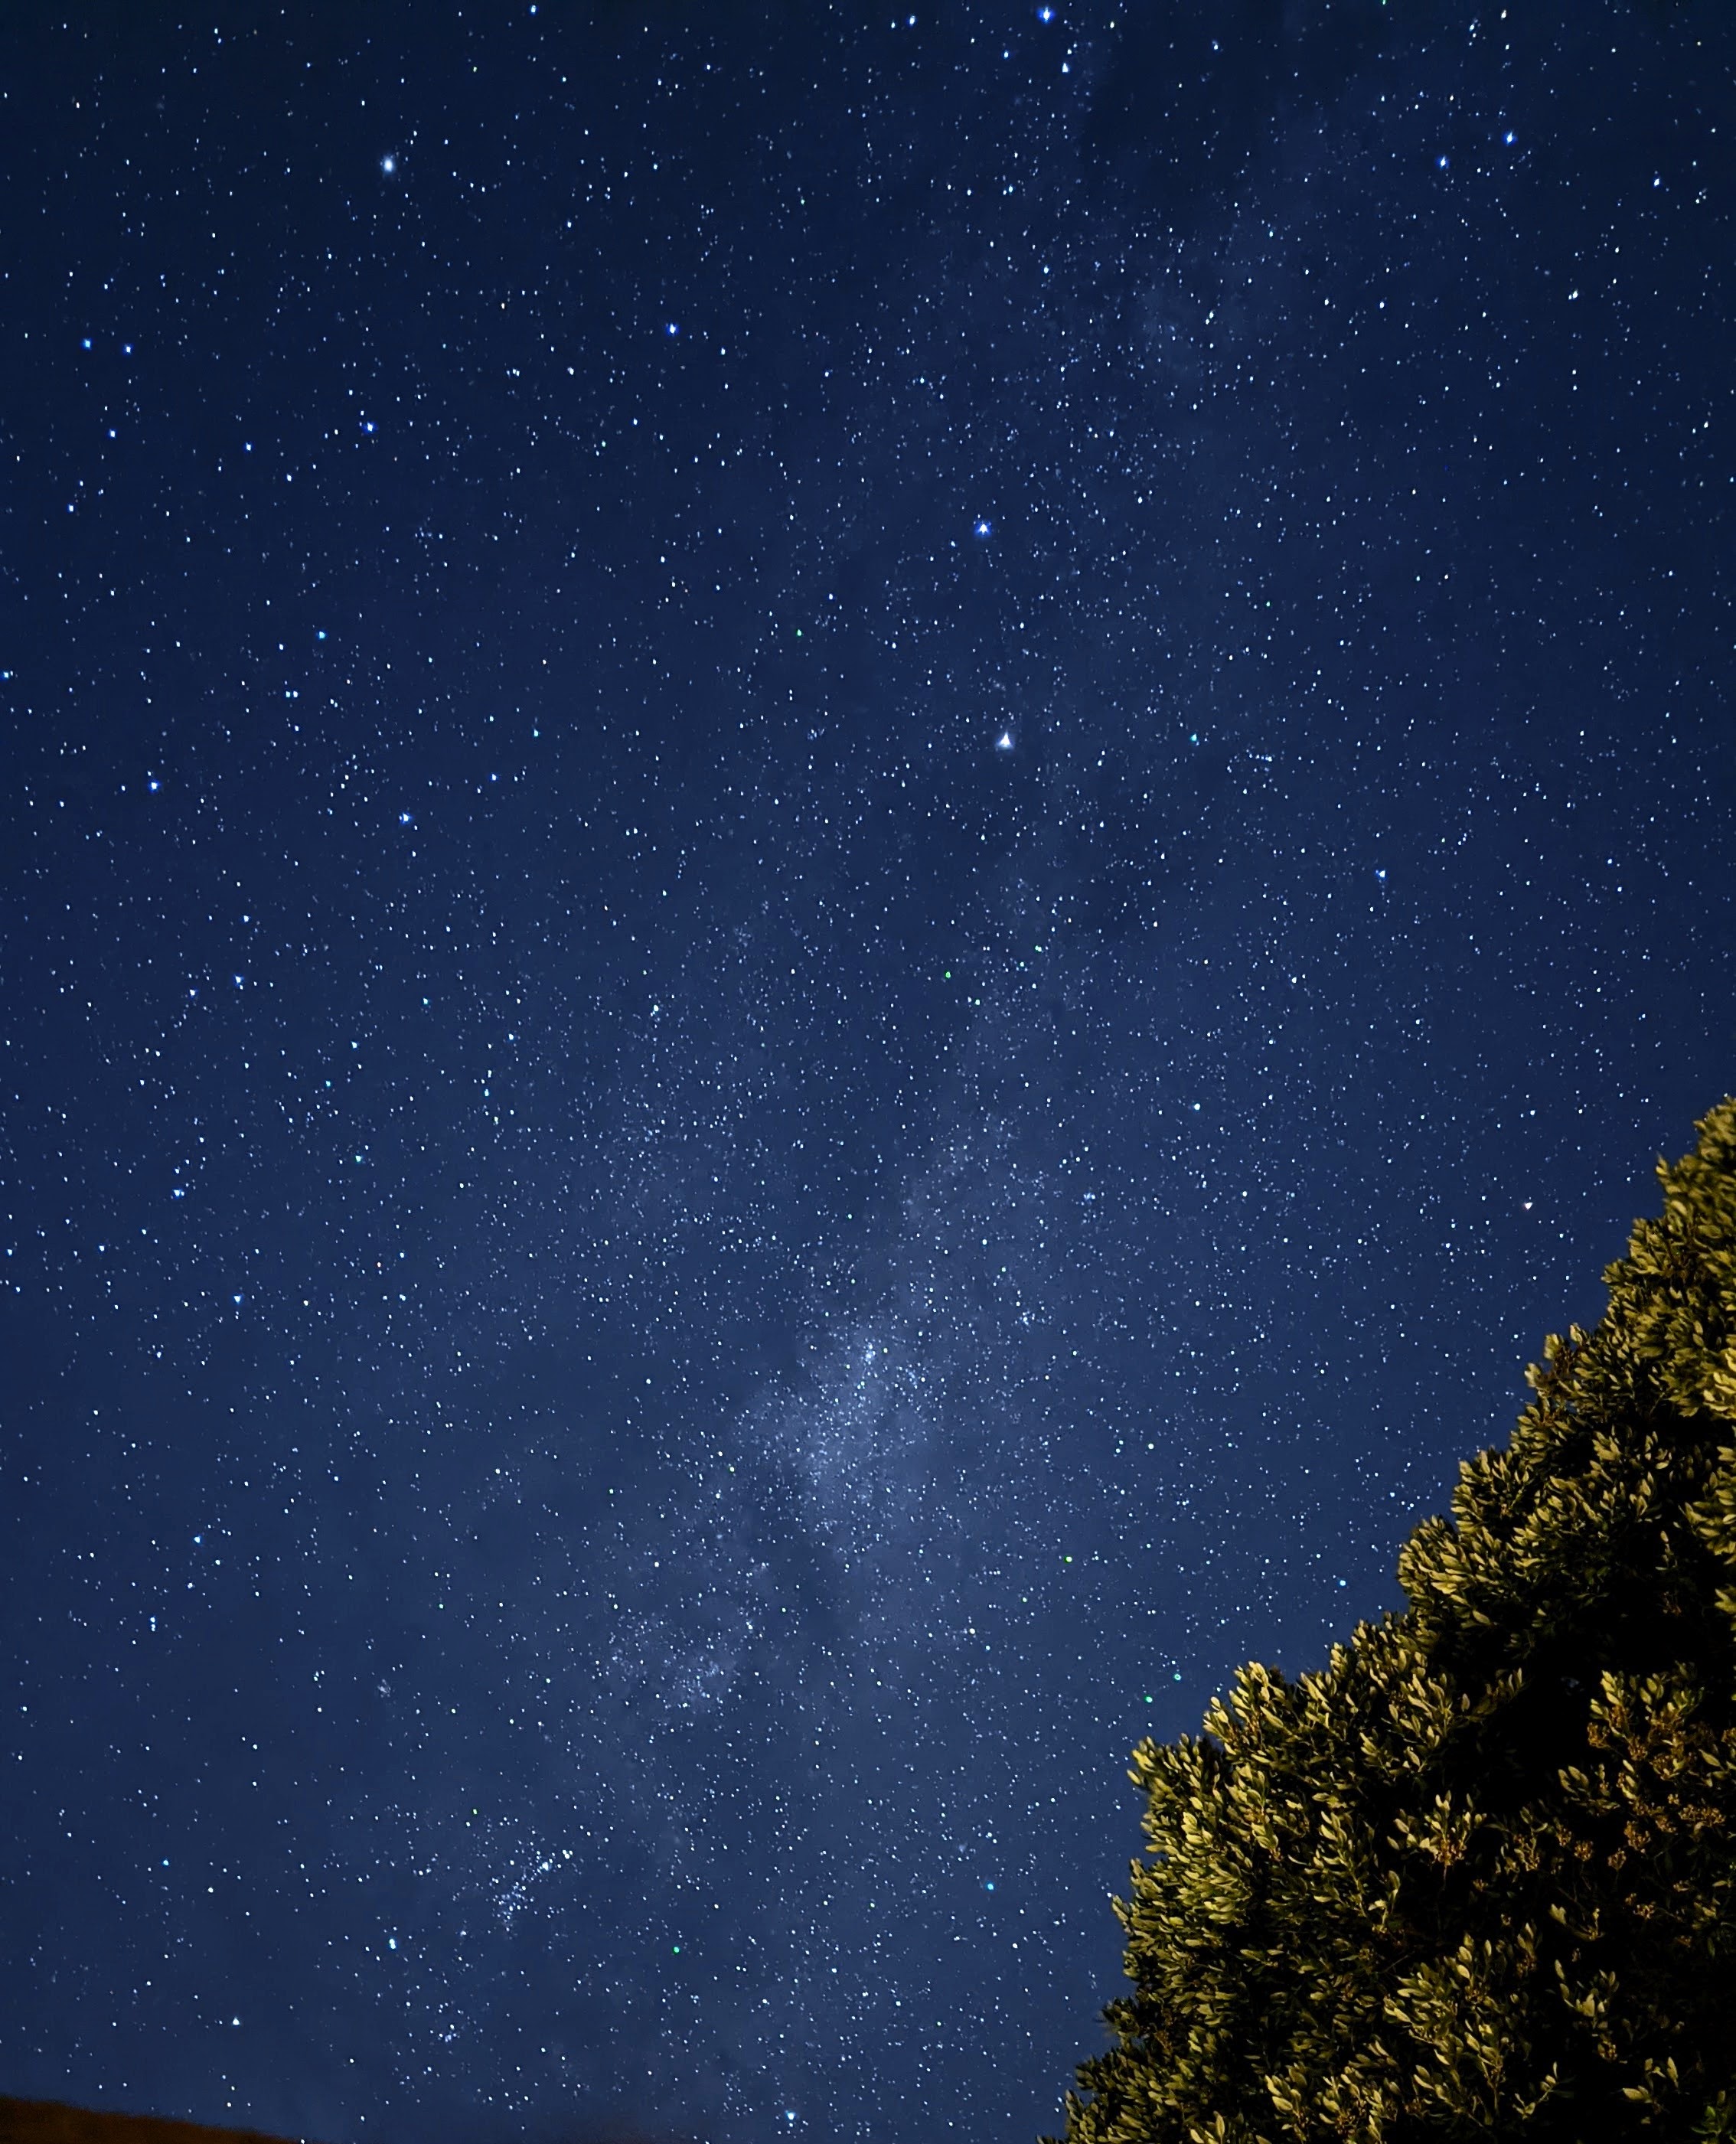 Astrophotography photo of the Milky Way with a tree close to the right